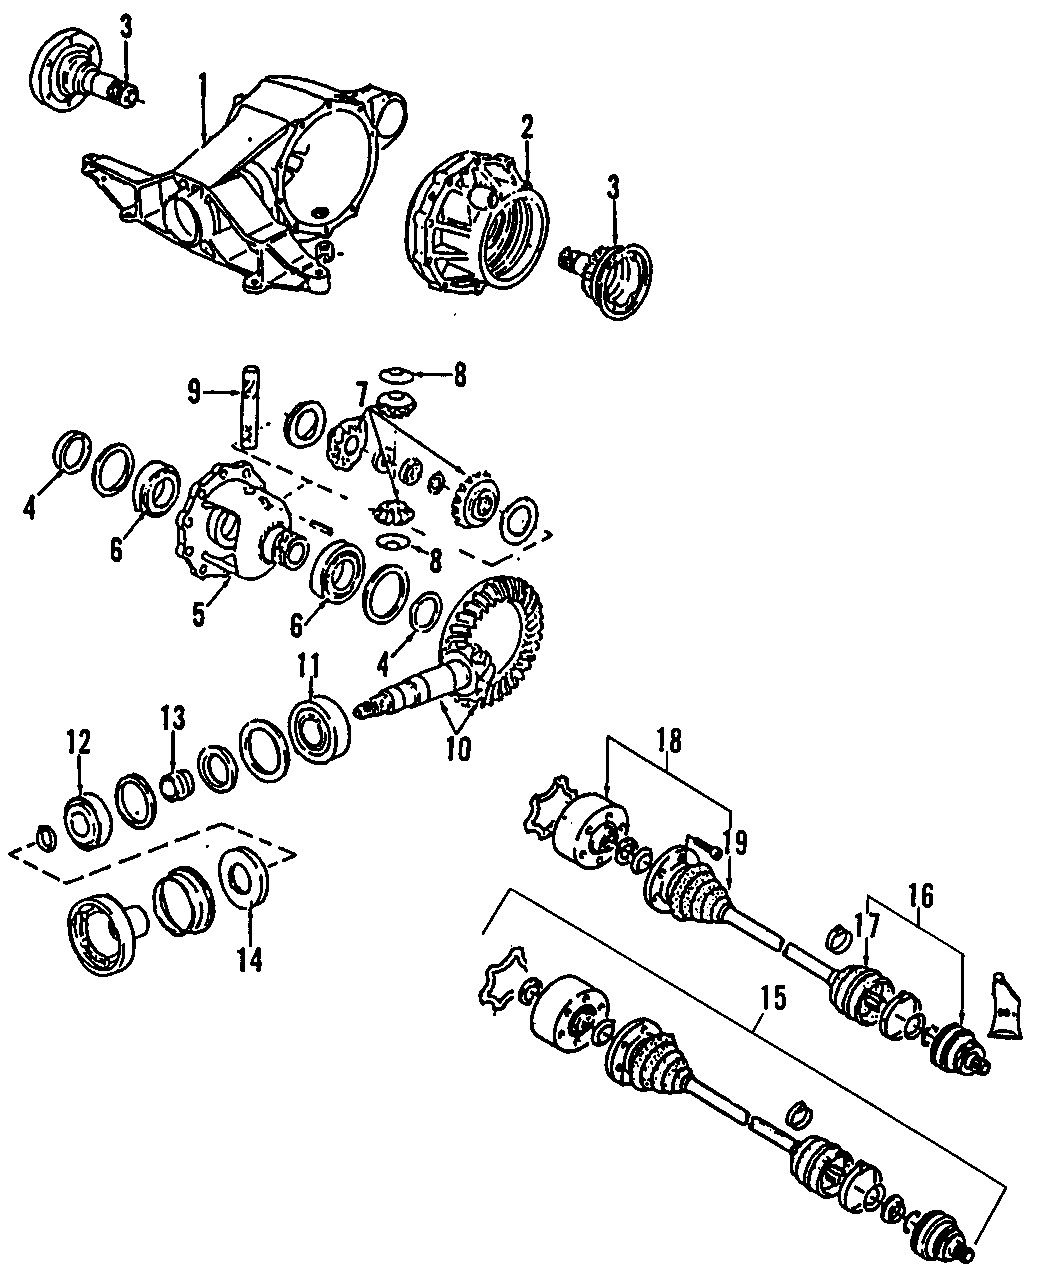 8DRIVE AXLES. REAR AXLE. AXLE SHAFTS & JOINTS. DIFFERENTIAL. PROPELLER SHAFT.https://images.simplepart.com/images/parts/motor/fullsize/F205080.png